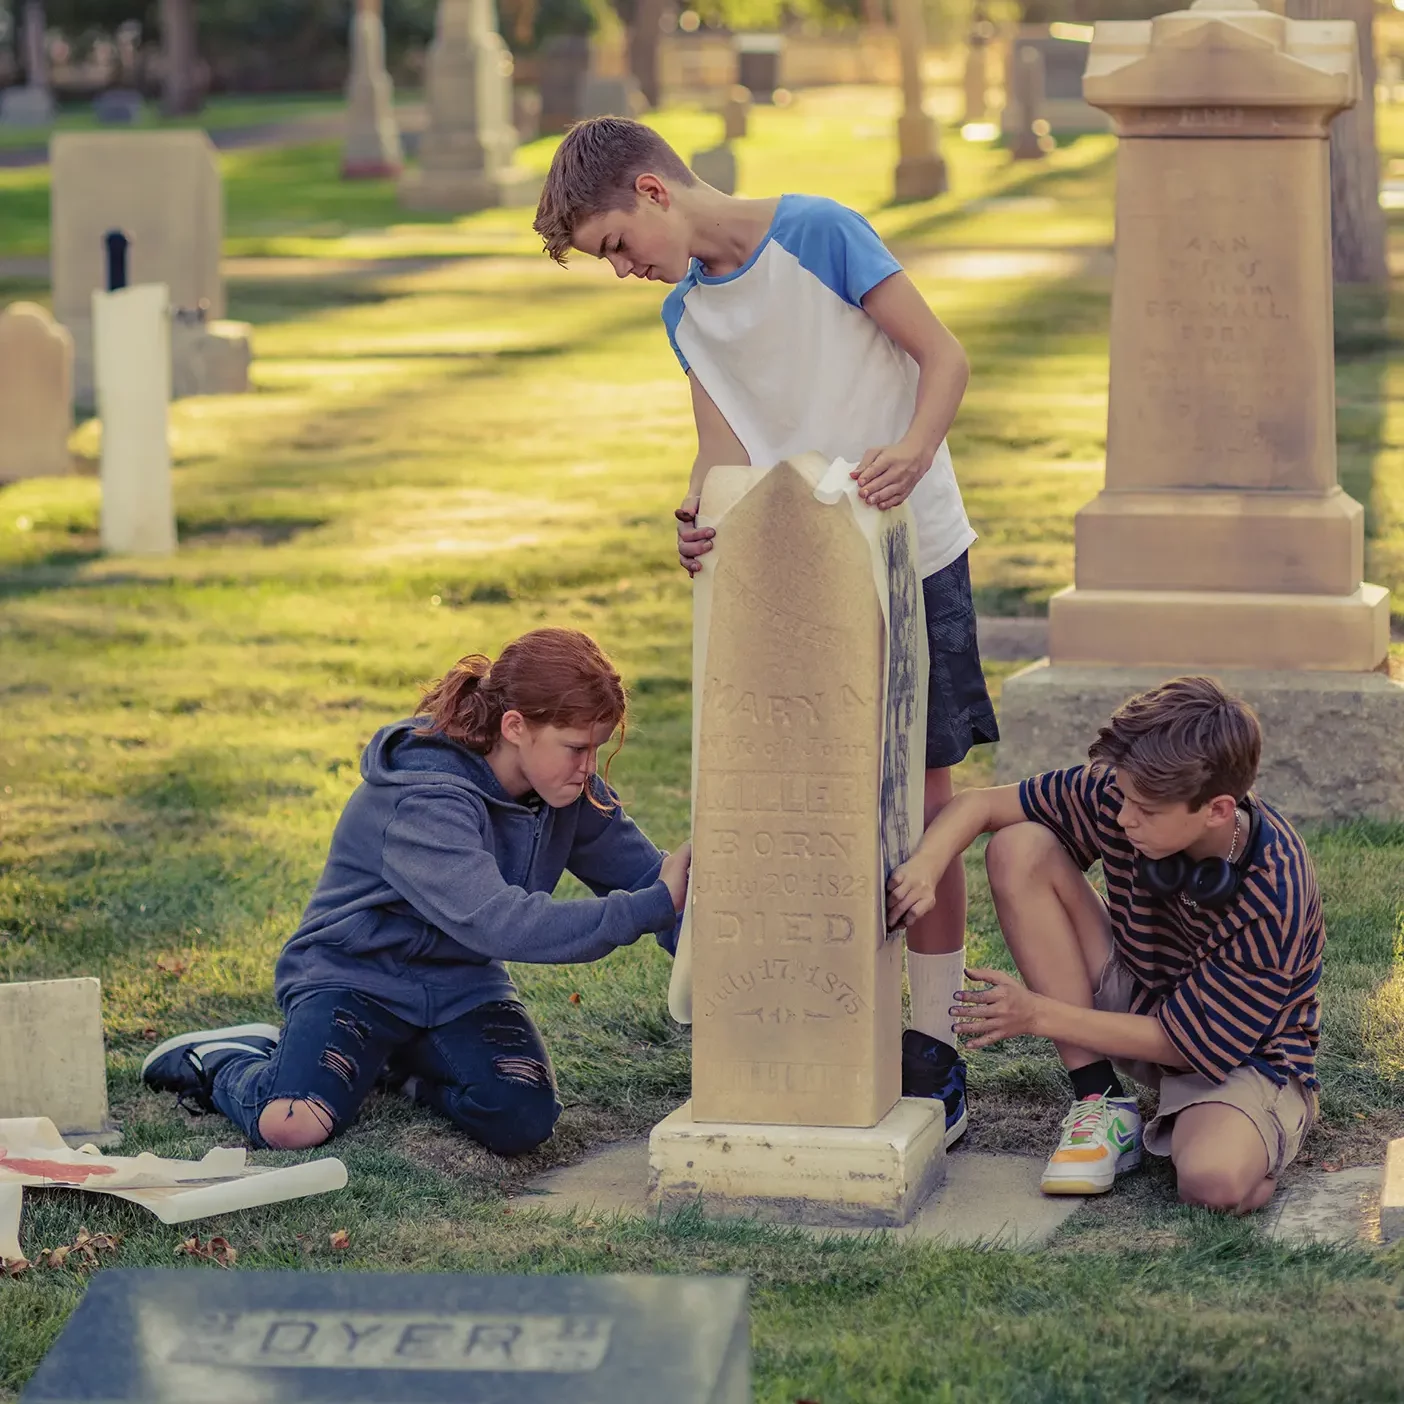 In a cemetery, three teens create an impression by rubbing chalk or charcoal on a paper pressed to a headstone.